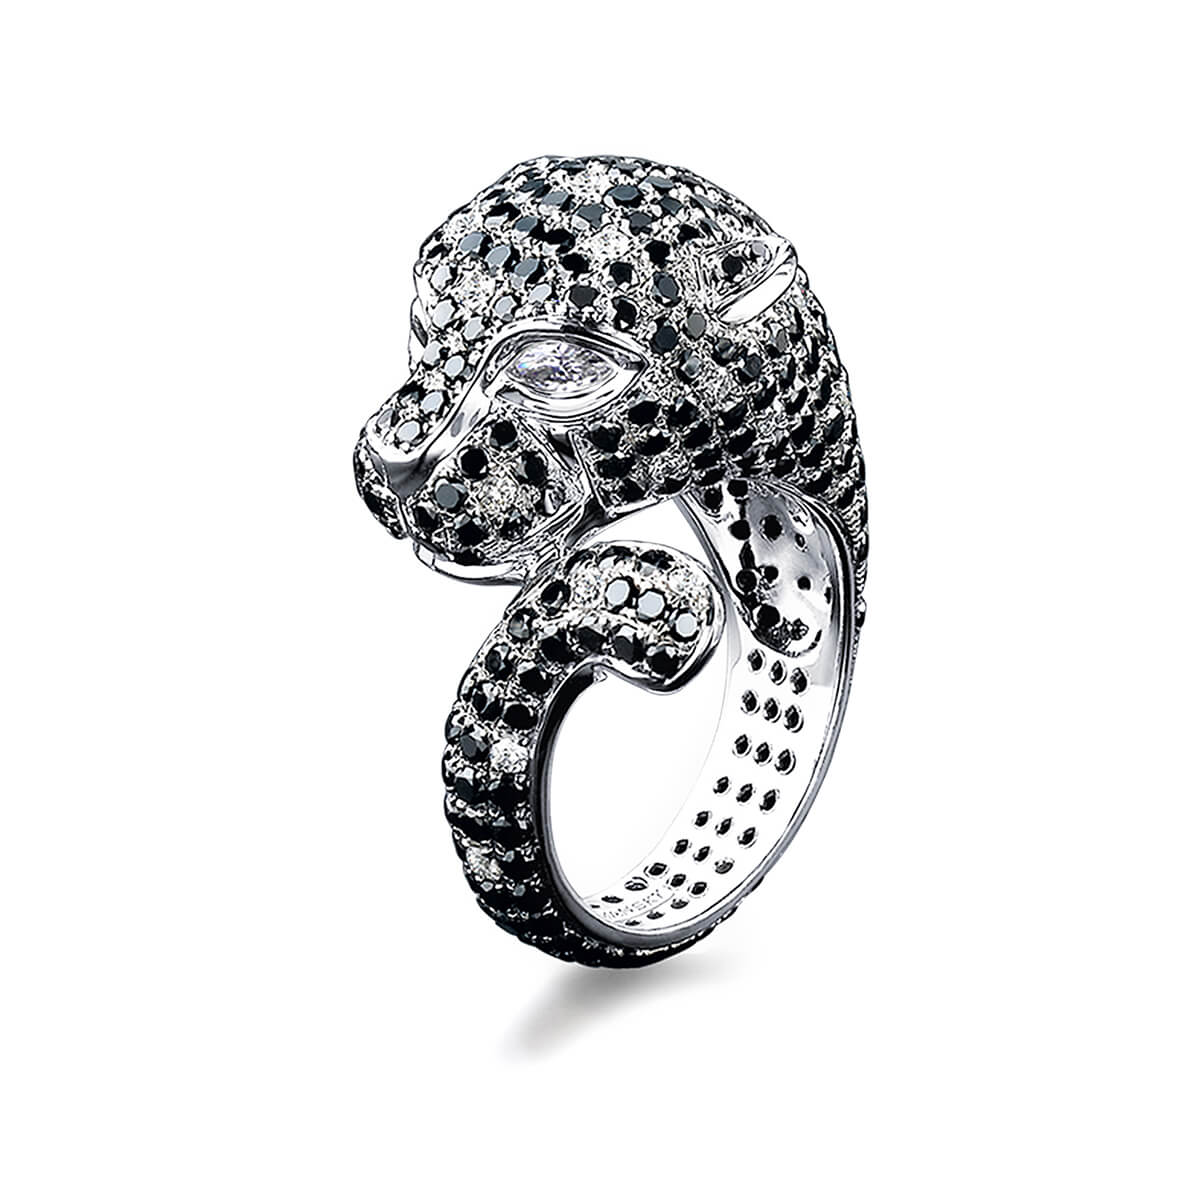 Black and White Diamond Panther Ring 3.9 TCW In 18K White Gold Profile View